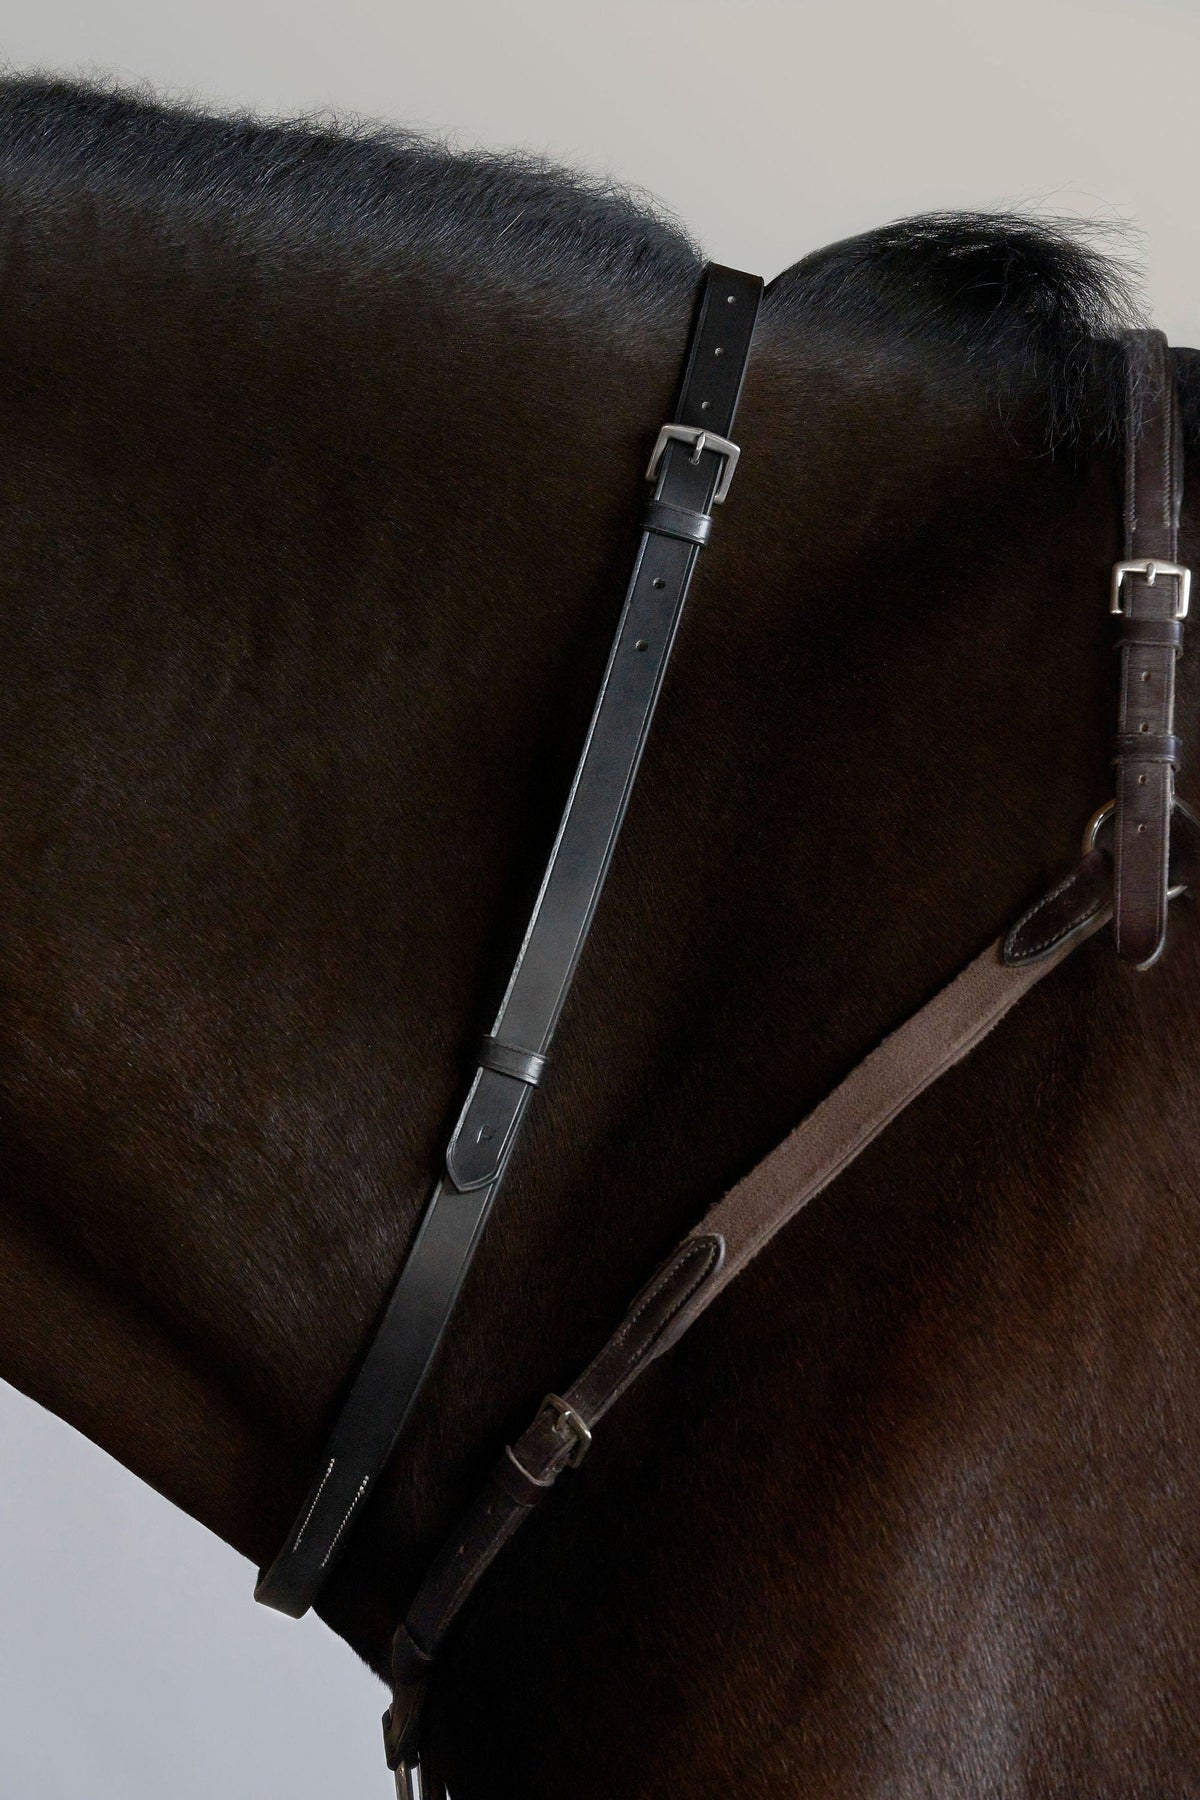 Tapestry Equine Neck Strap Tapestry Neckstrap and Attachment Neck Strap | Horse Tack | Tapestry Equine Products 